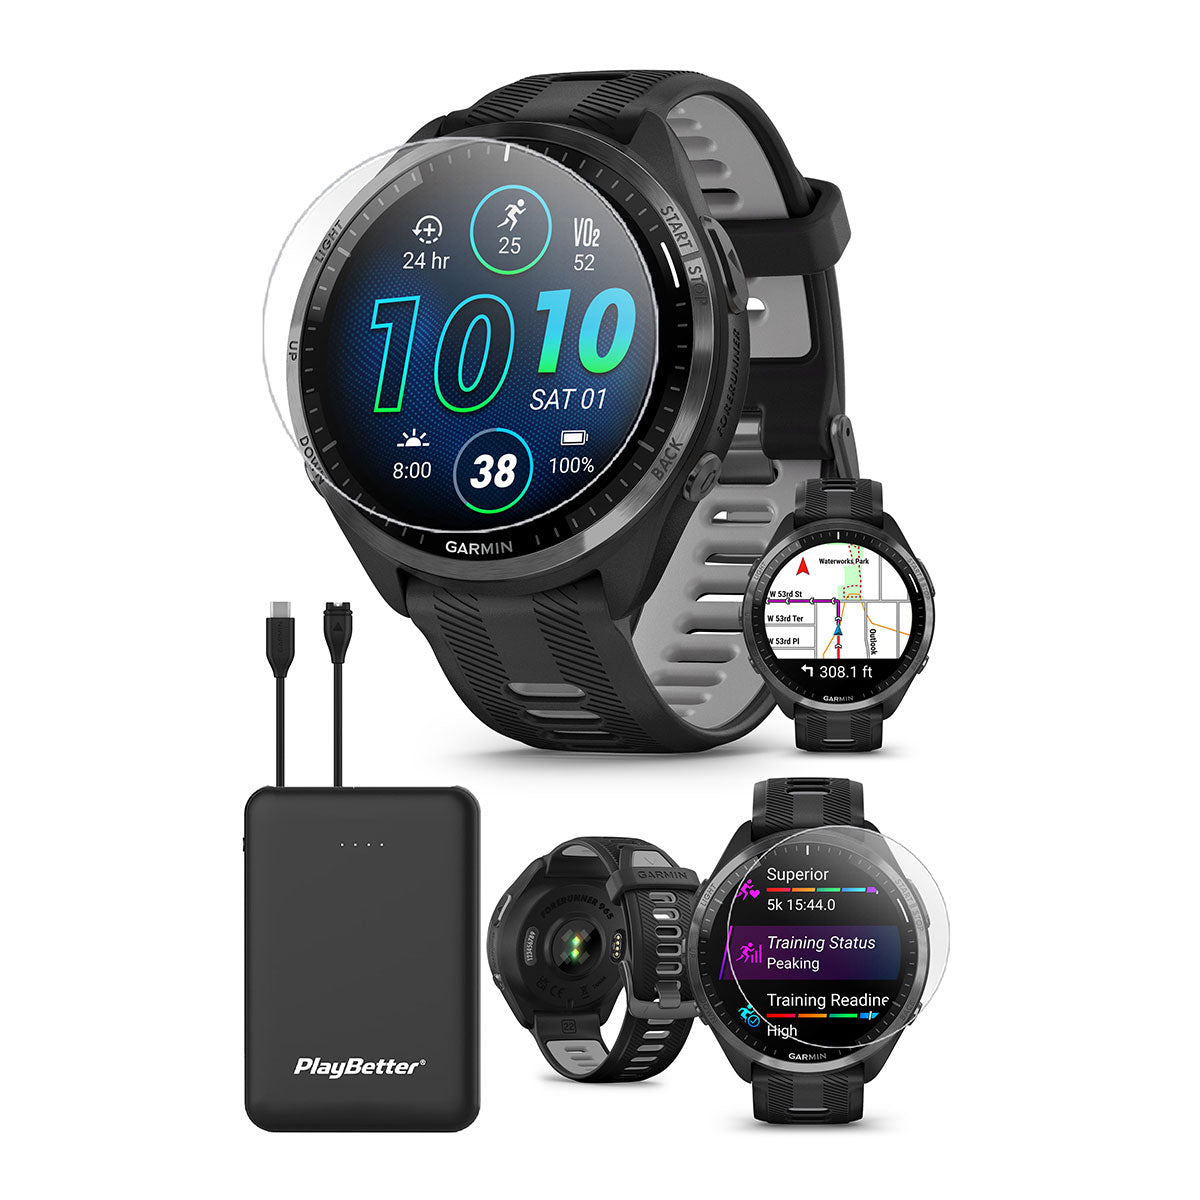 Garmin Forerunner 965 (Black/Powder Gray) Premium Running & Triathlon GPS Smartwatch | Bundle with PlayBetter Screen Protectors & Portable Charger - image 1 of 9